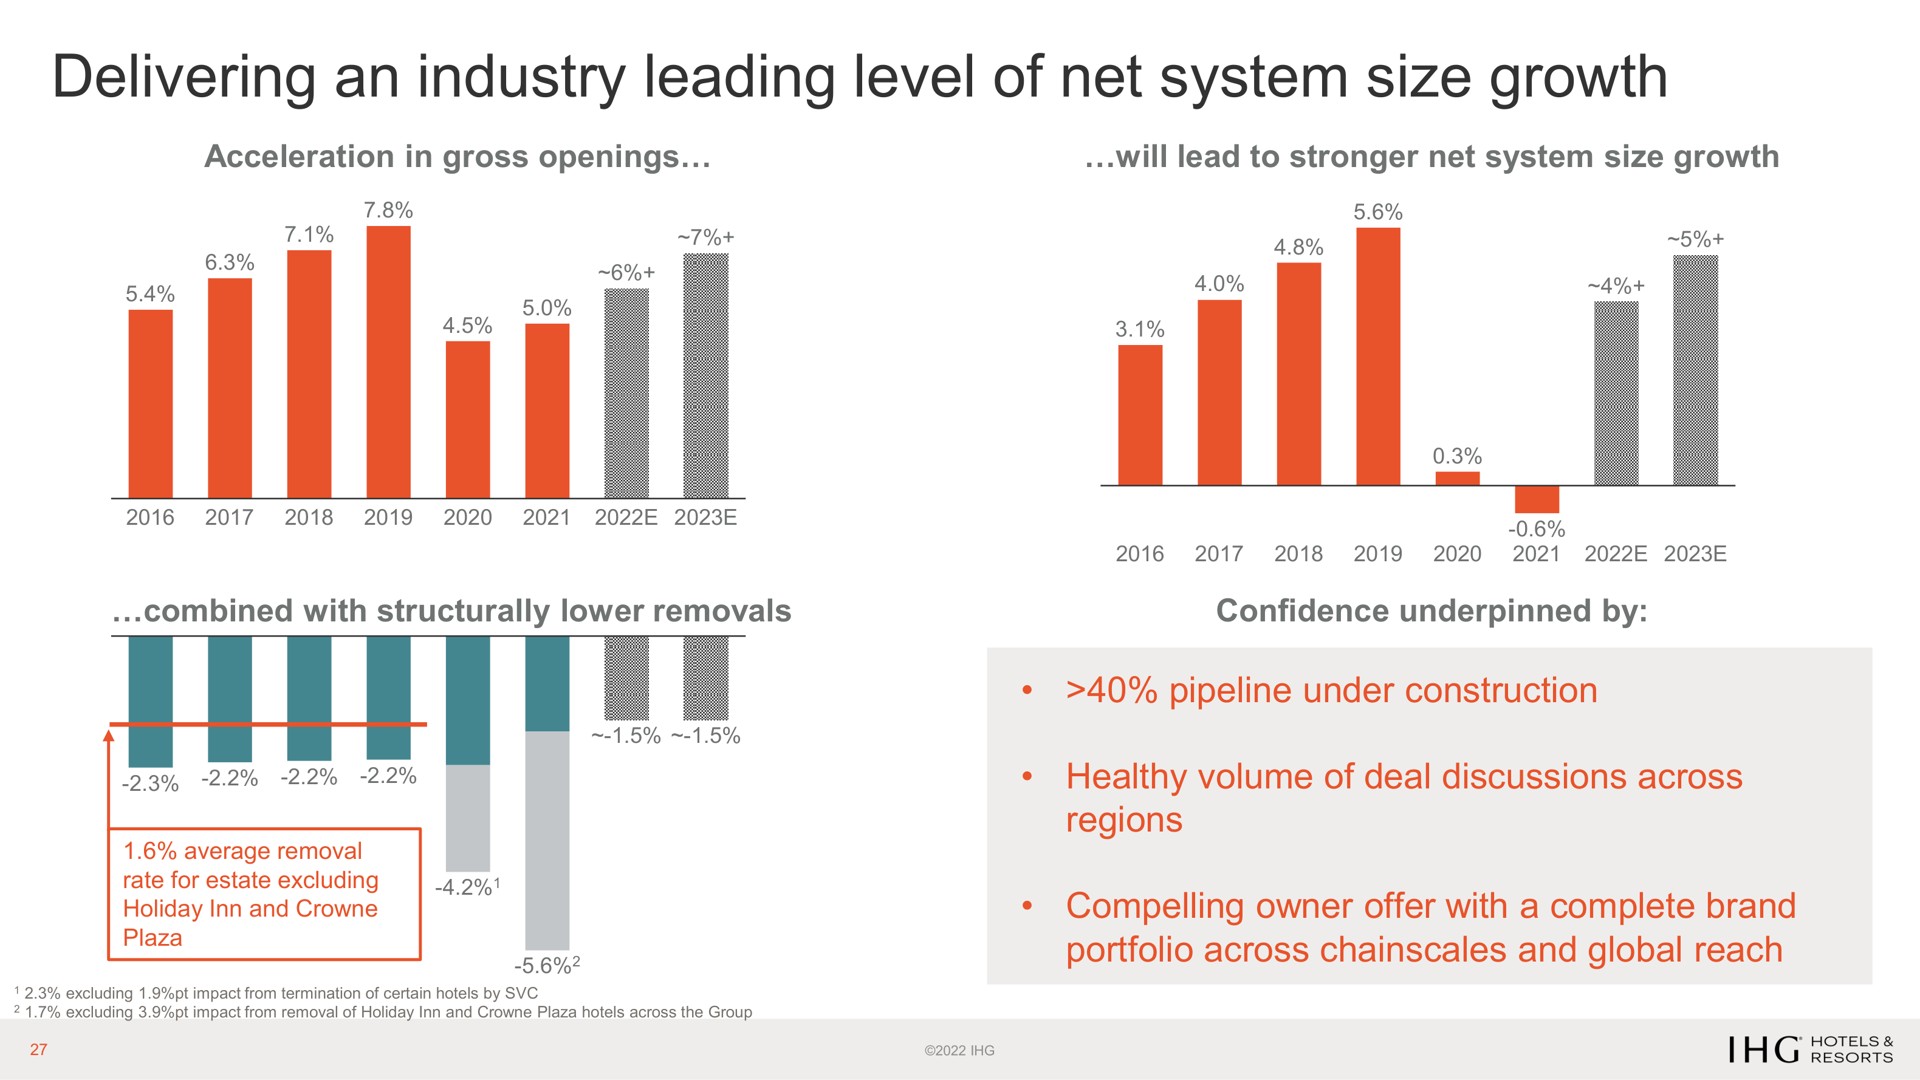 delivering an industry leading level of net system size growth | IHG Hotels